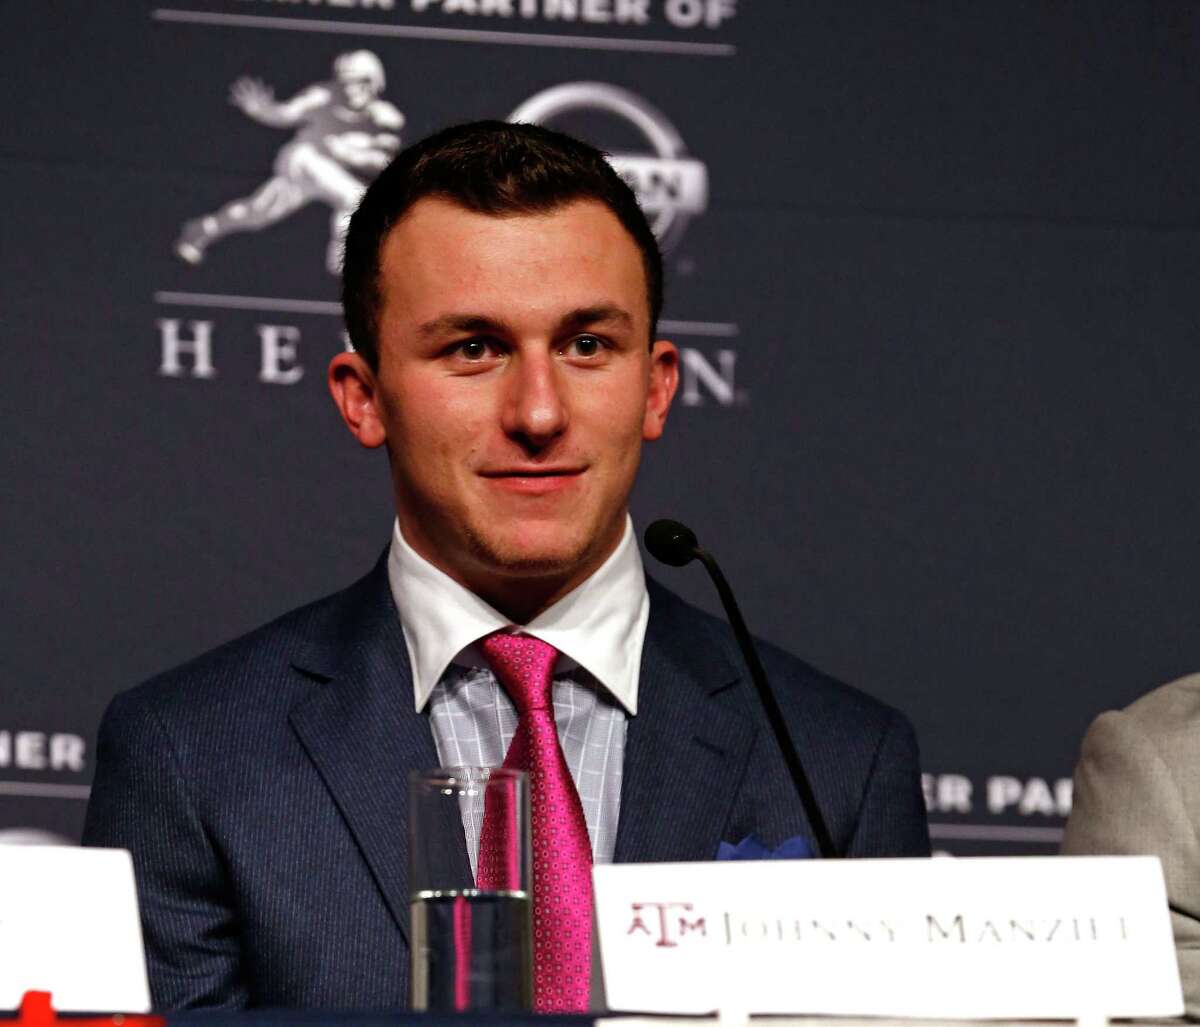 After winning the 2012 Heisman Trophy, Kerrville Tivy's Johnny Manziel was the toast of college football. But in the months that followed, the celebration quickly turned into a circus. A series of headline-grabbing off-the-field incidents culminated in allegations Johnny Football had received money in exchange for autographs, a violation of NCAA rules. An investigation found “no evidence” of the charges, but Manziel was ruled guilty of an “inadvertent violation” and suspended for the first half of the season opener against Rice.